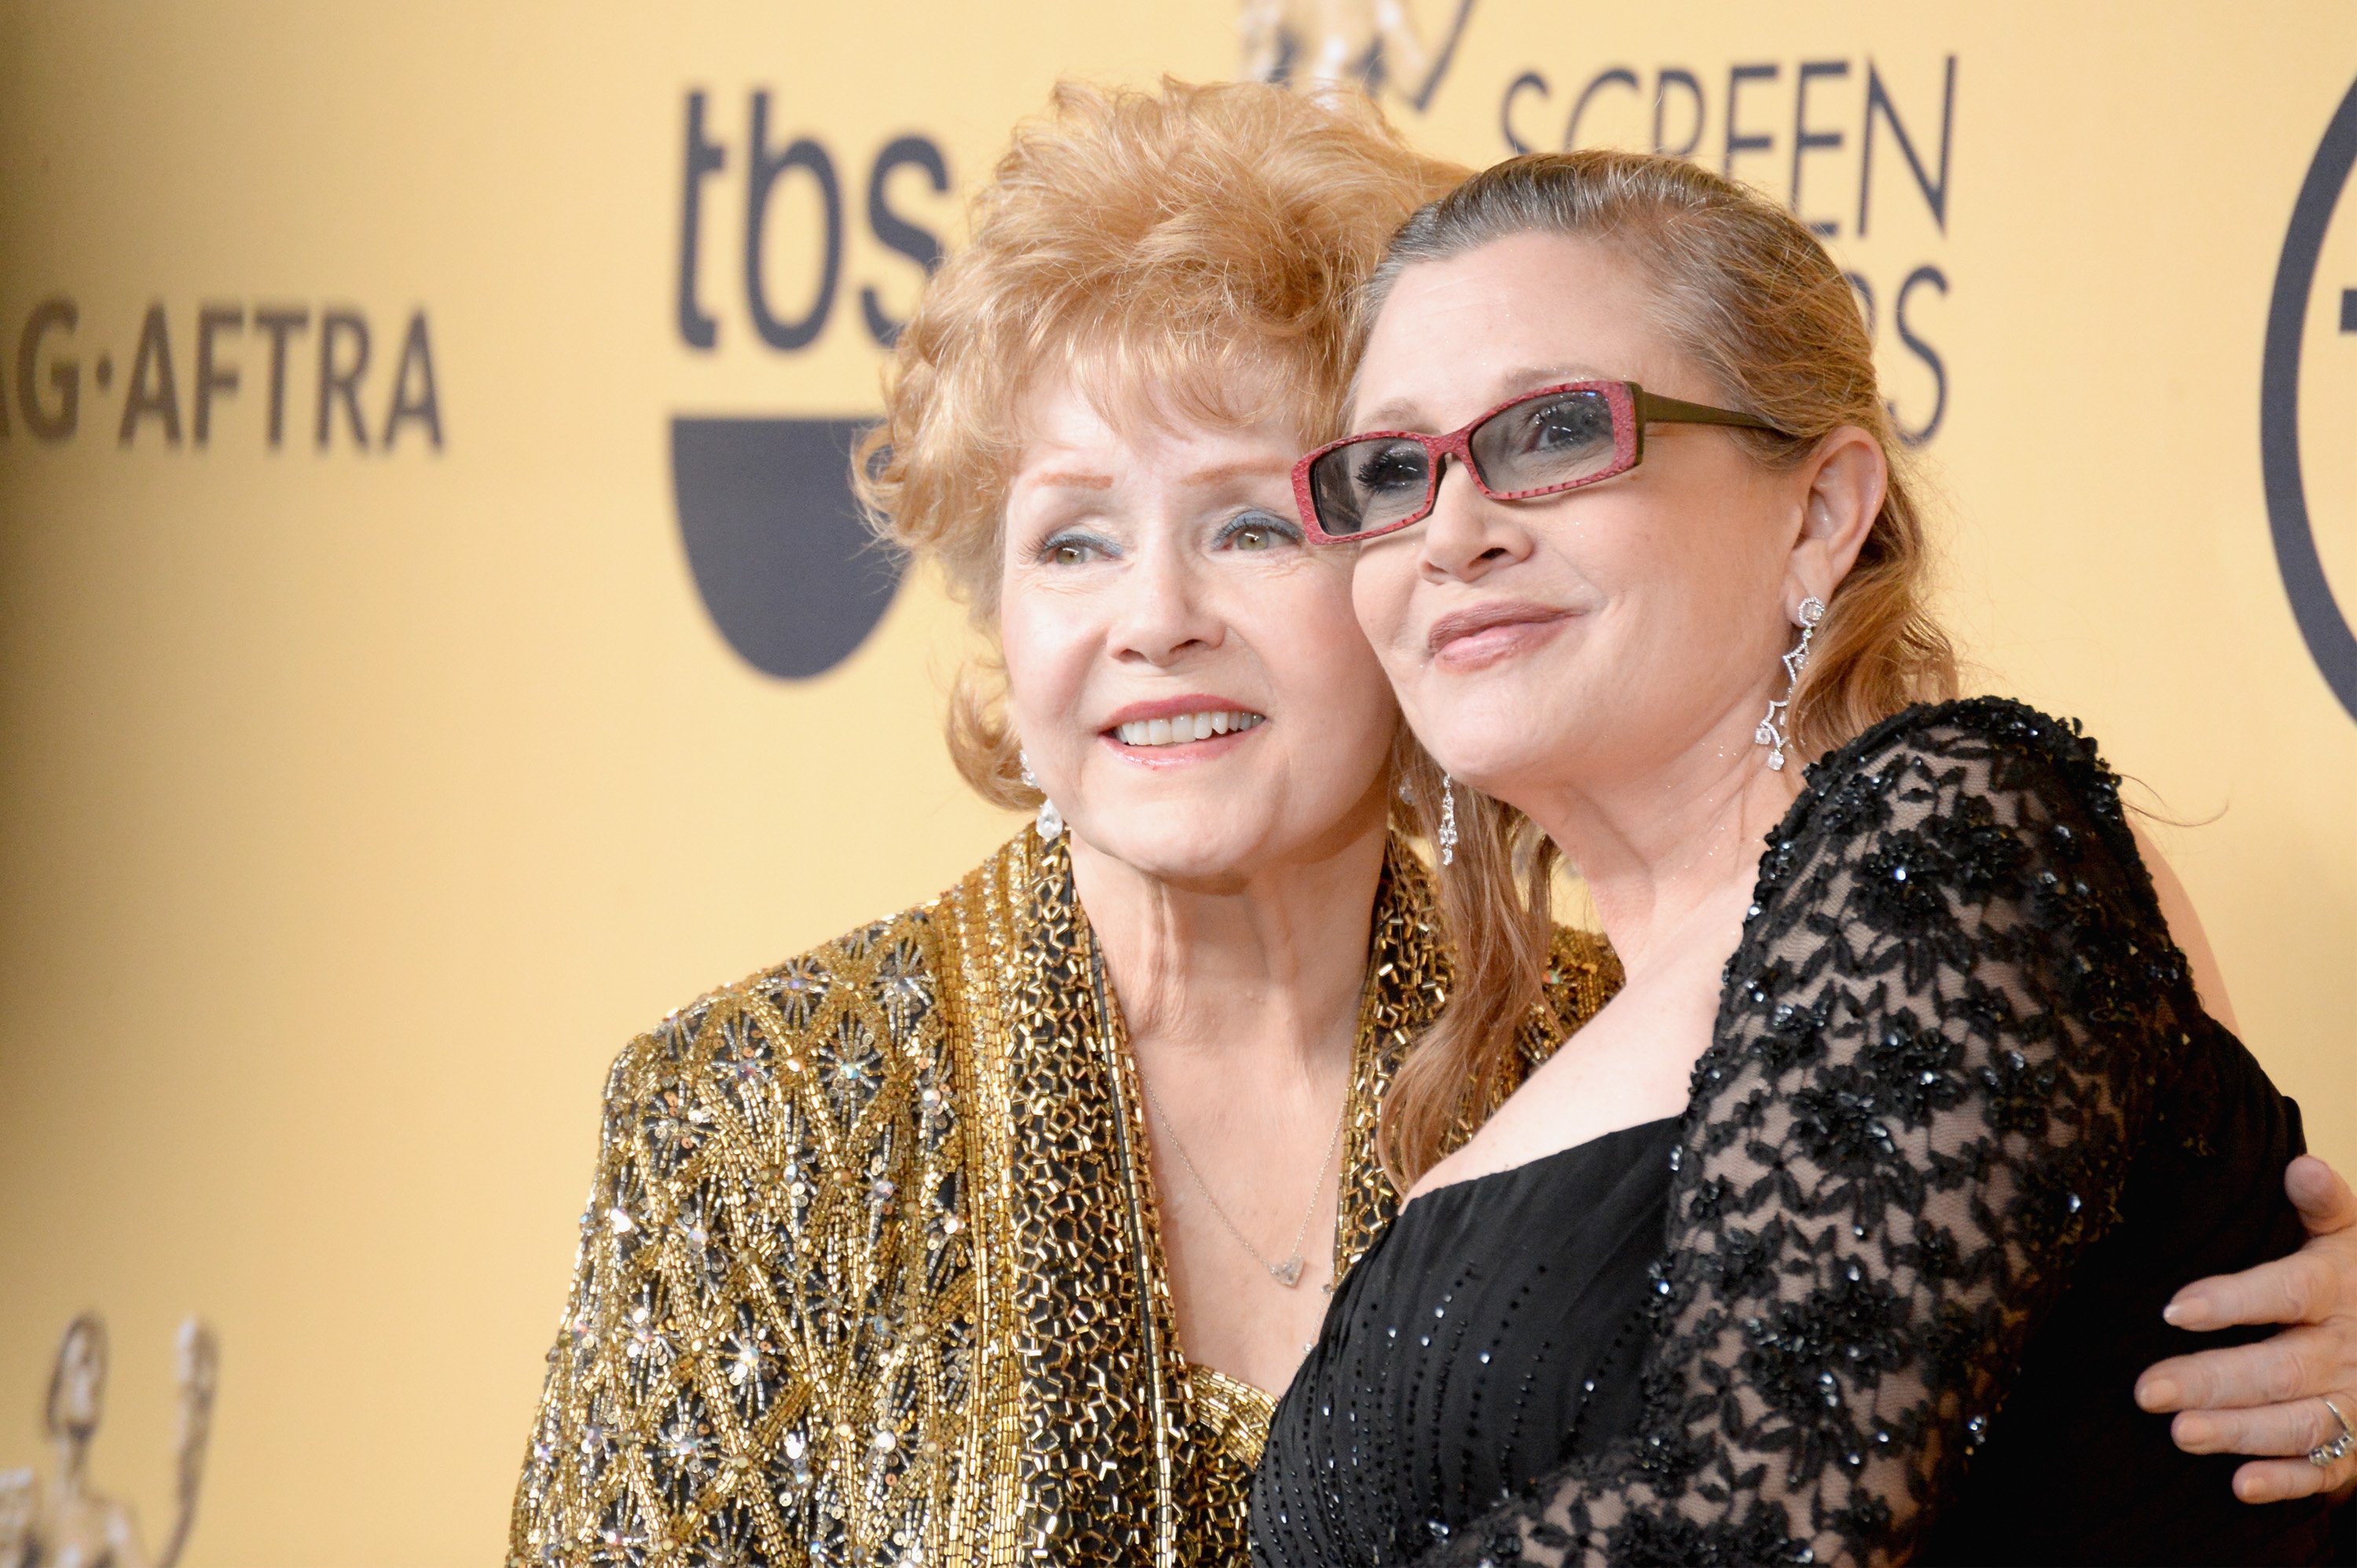 Carrie Fisher and Debbie Reynolds at the 21st Annual Screen Actors Guild Awards in Los Angeles, 25 January, 2015. | Photo: Getty Images